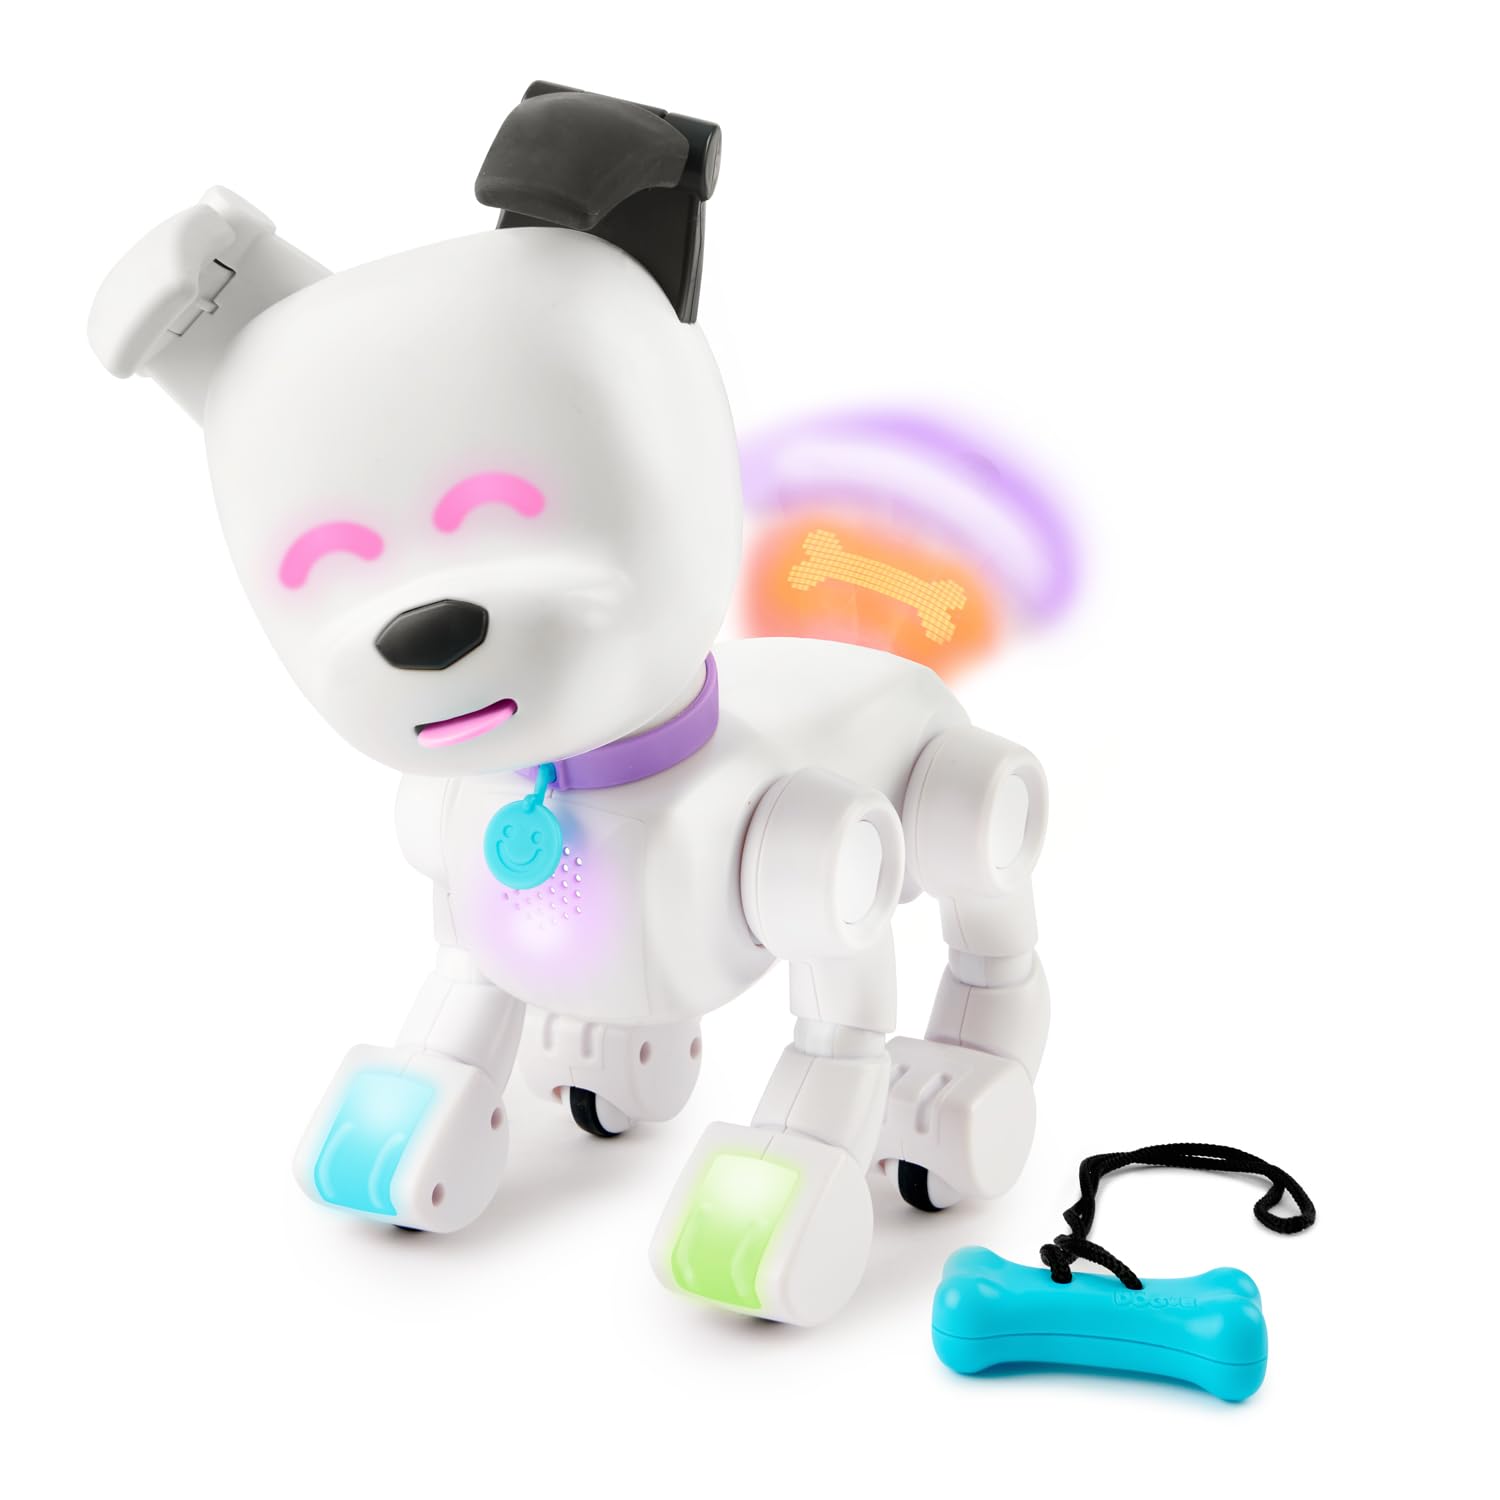 Dog-E Interactive Robot Dog with Colorful LED Lights, 2...